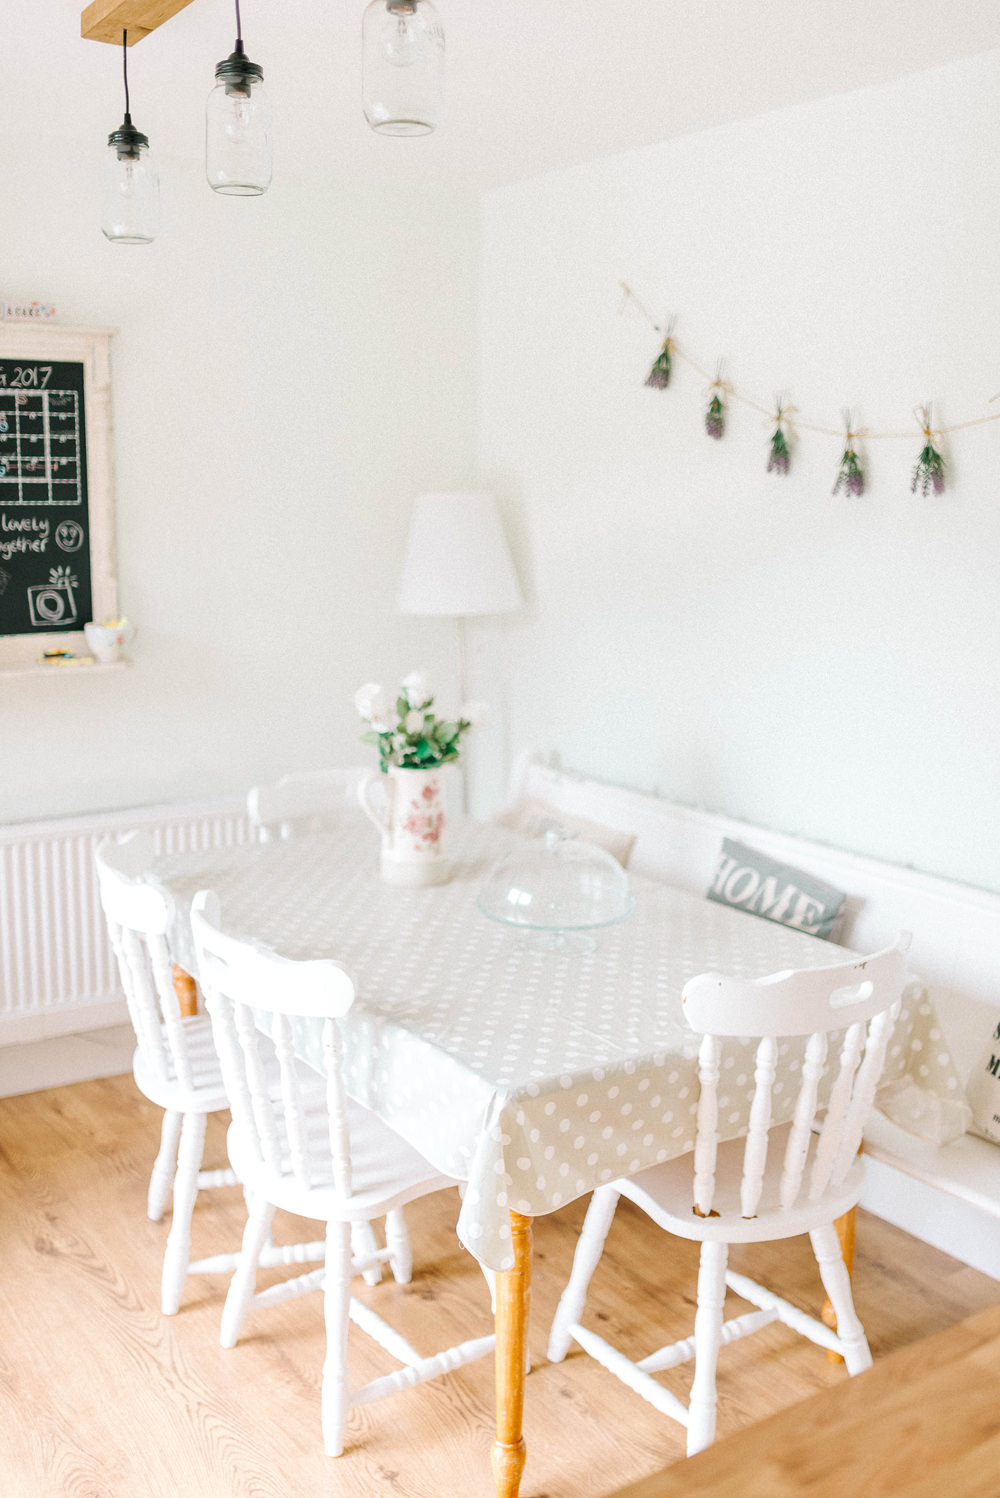 Chair, polka dot table and blackboard in a bright shabby chic kitchen